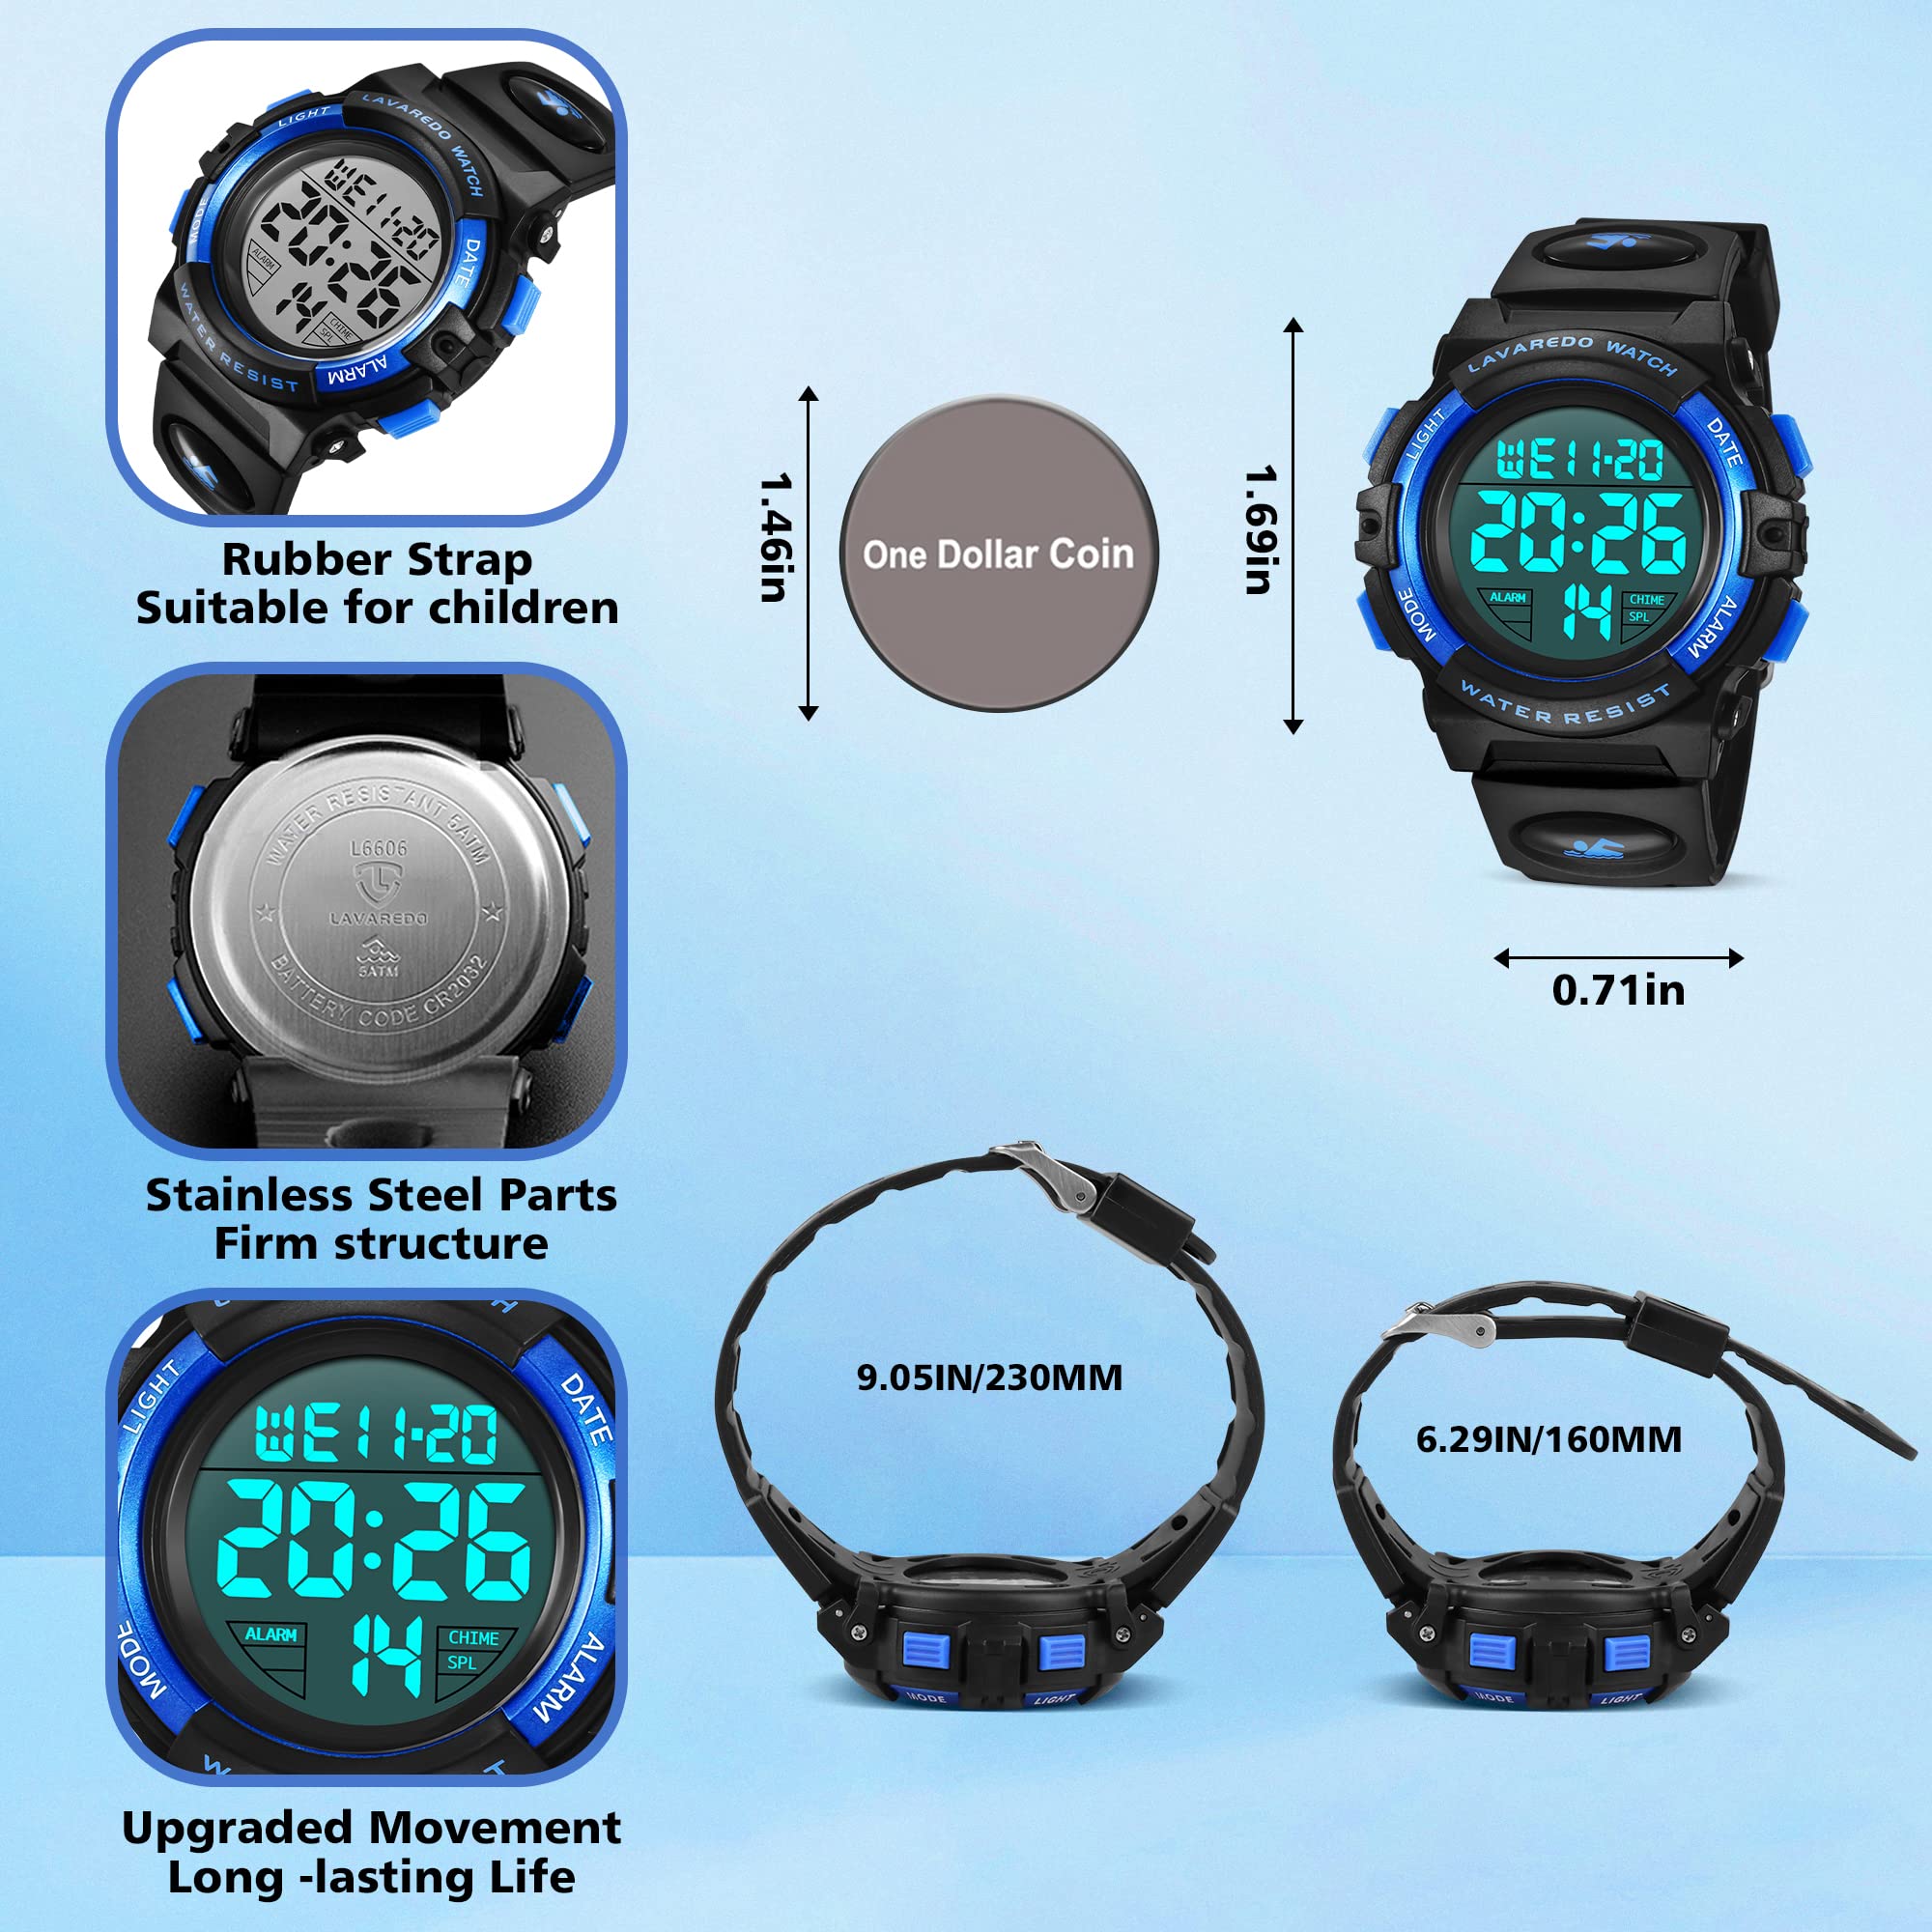 Kids Watch,Boys Watch for 3-15 Year Old Boys,Digital Sport Outdoor Multifunctional Chronograph LED 50 M Waterproof Alarm Calendar Analog Watch for Children with Silicone Band,Kids Gift